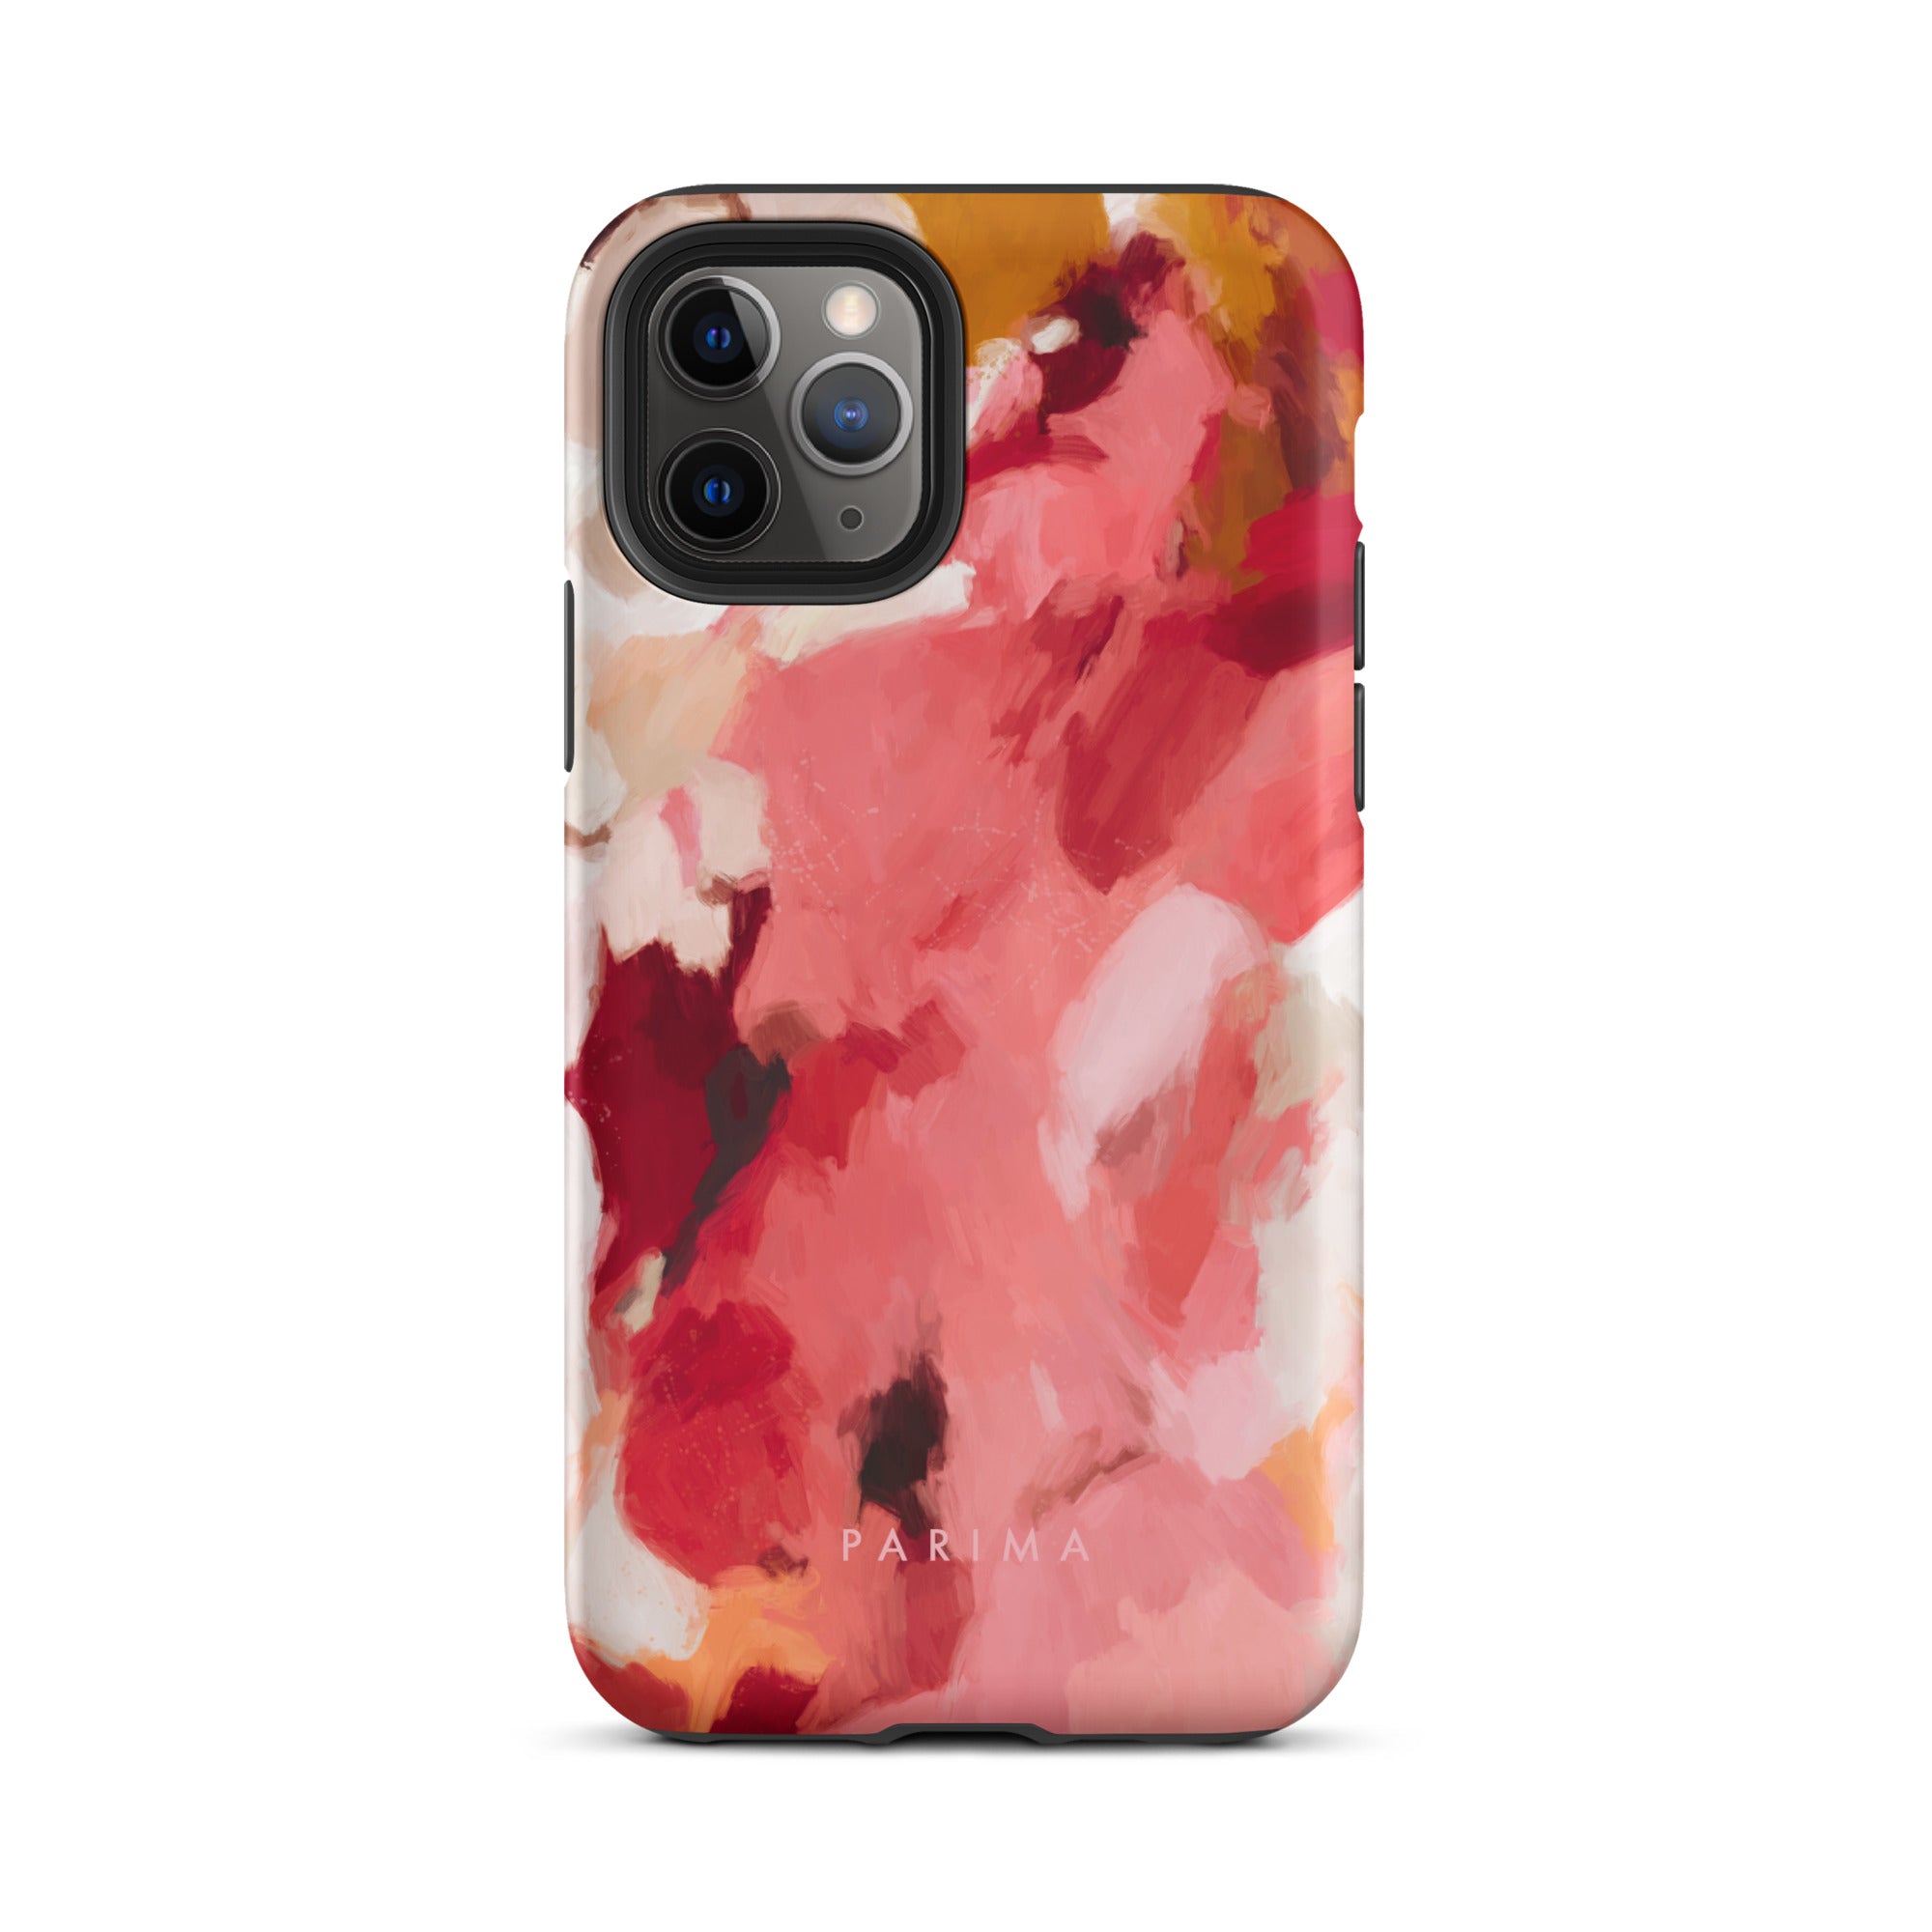 Apple, red and pink abstract art - iPhone 11 Pro tough case by Parima Studio